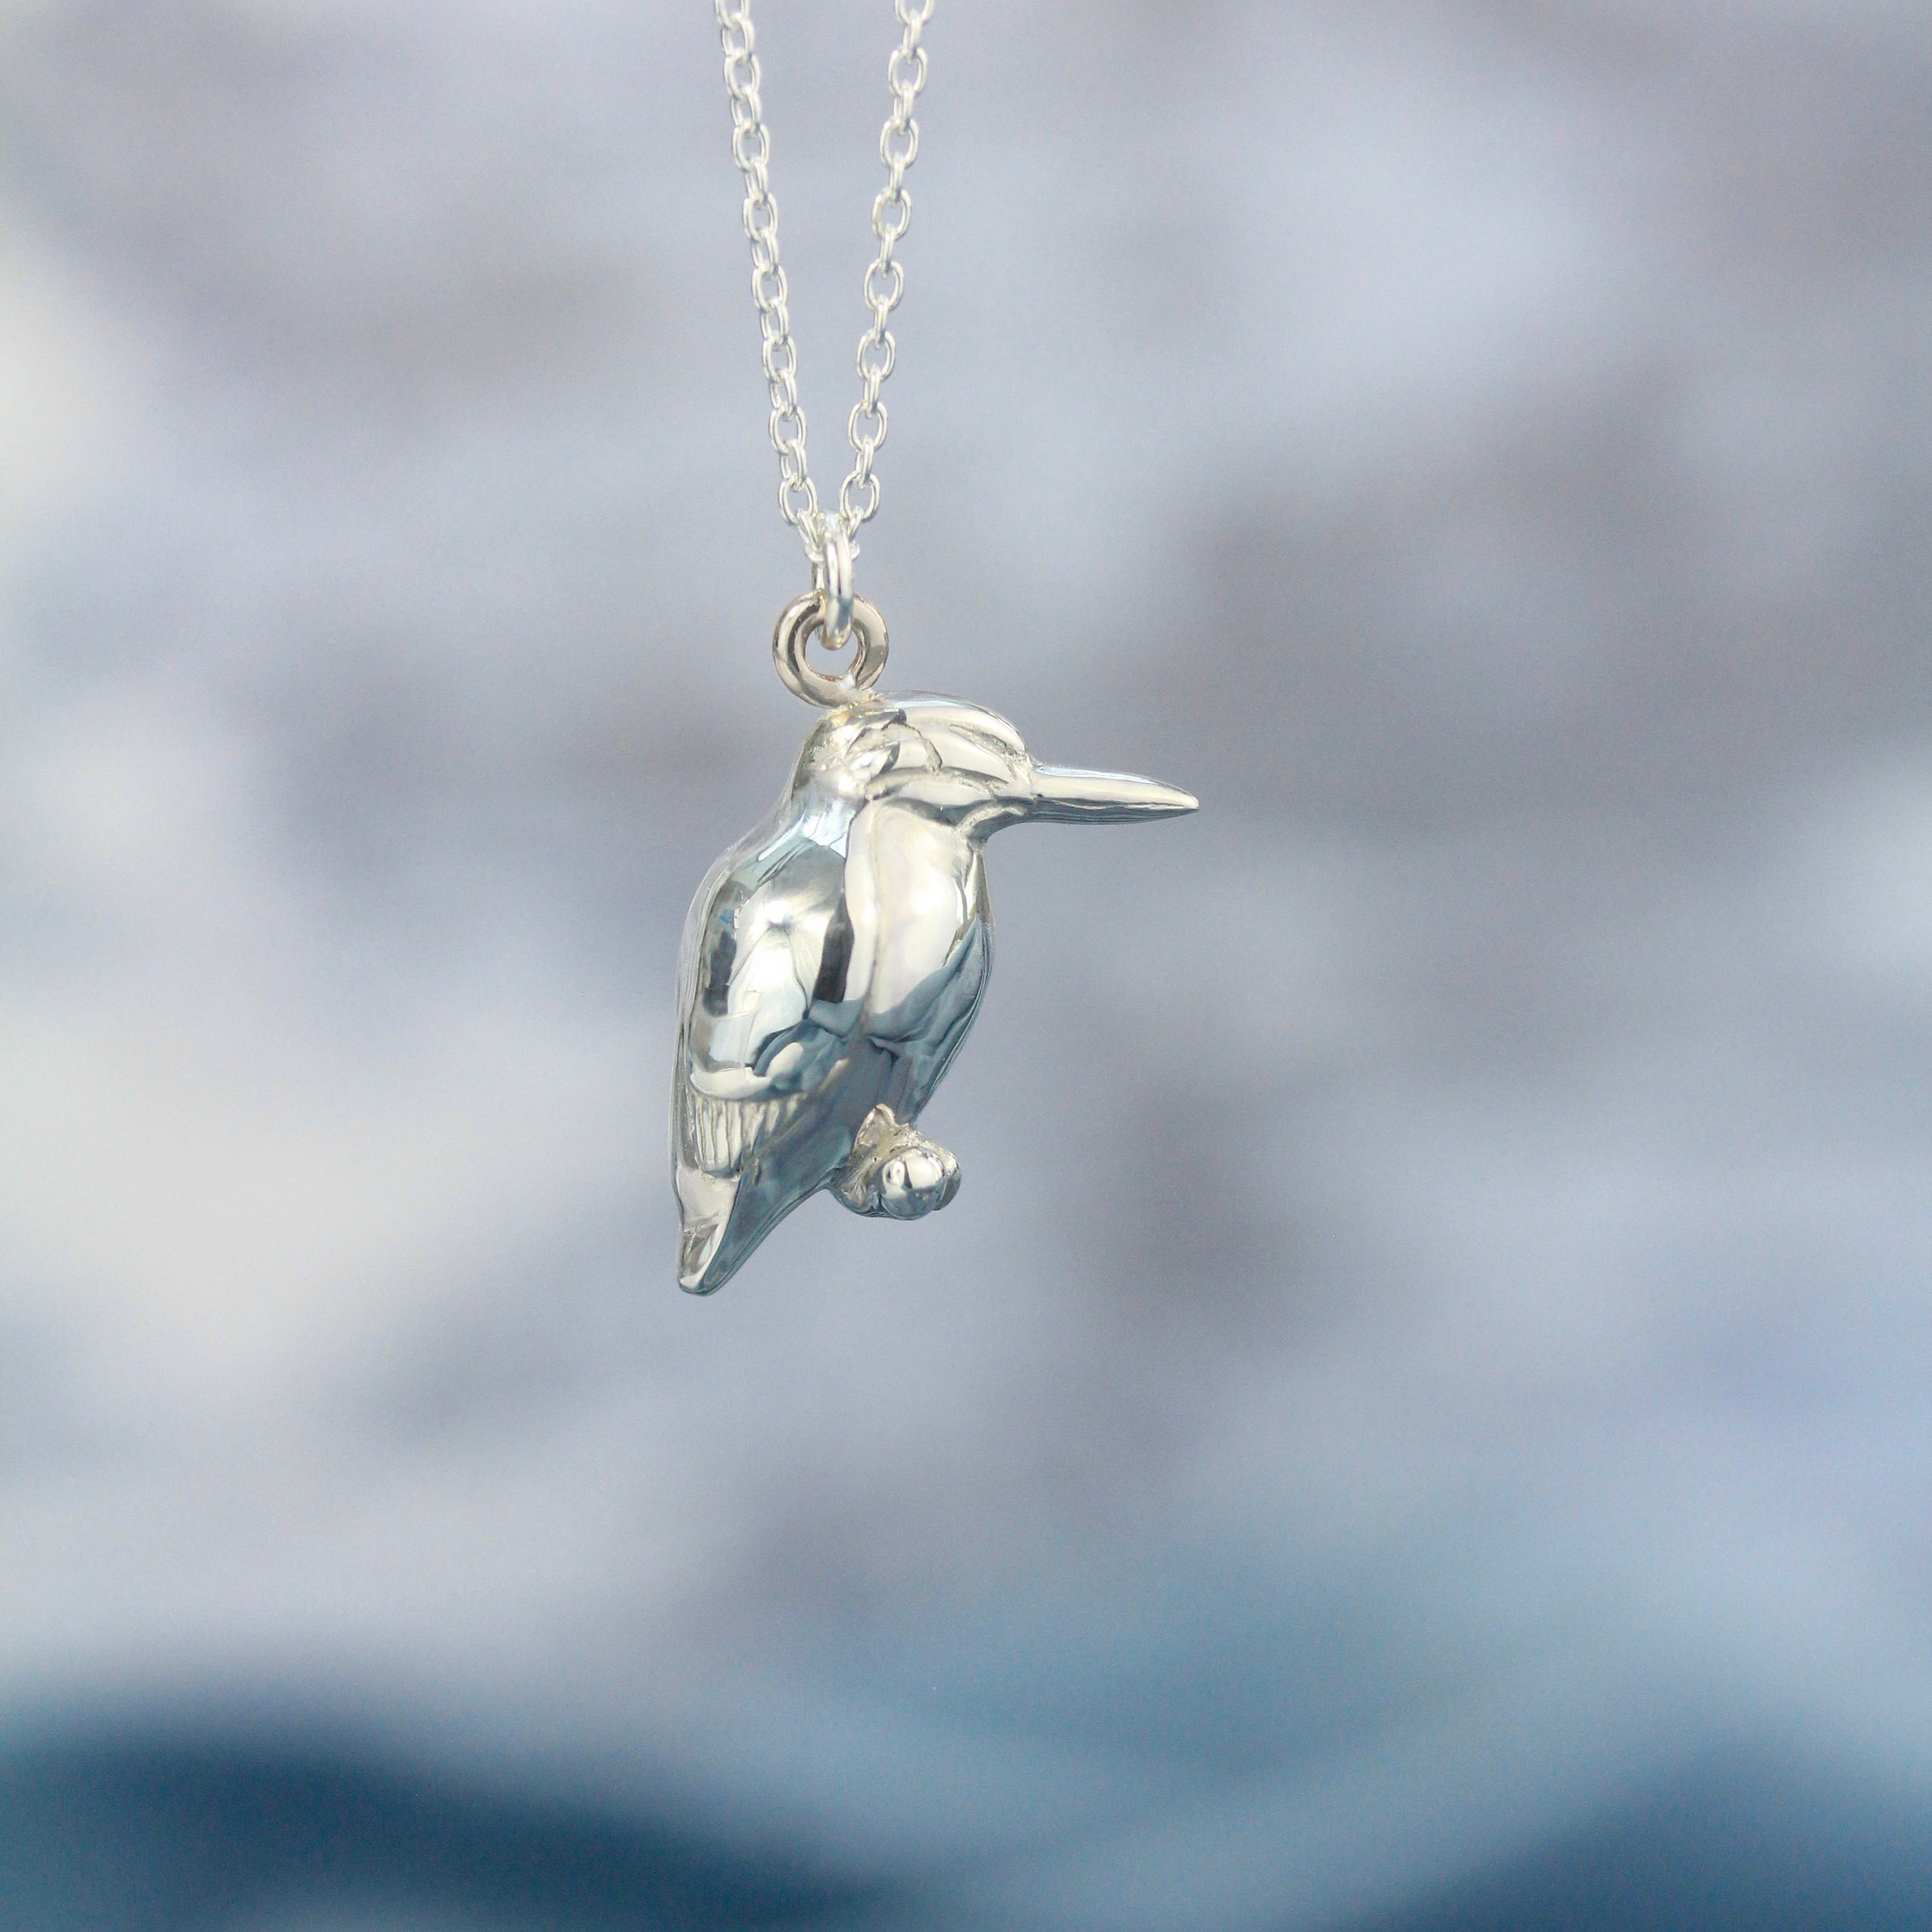 Kingfisher Necklace | Sterling Silver Kingfisher Pendant Personalised Animal Pendant By Rosalind Elunyd Jewellery